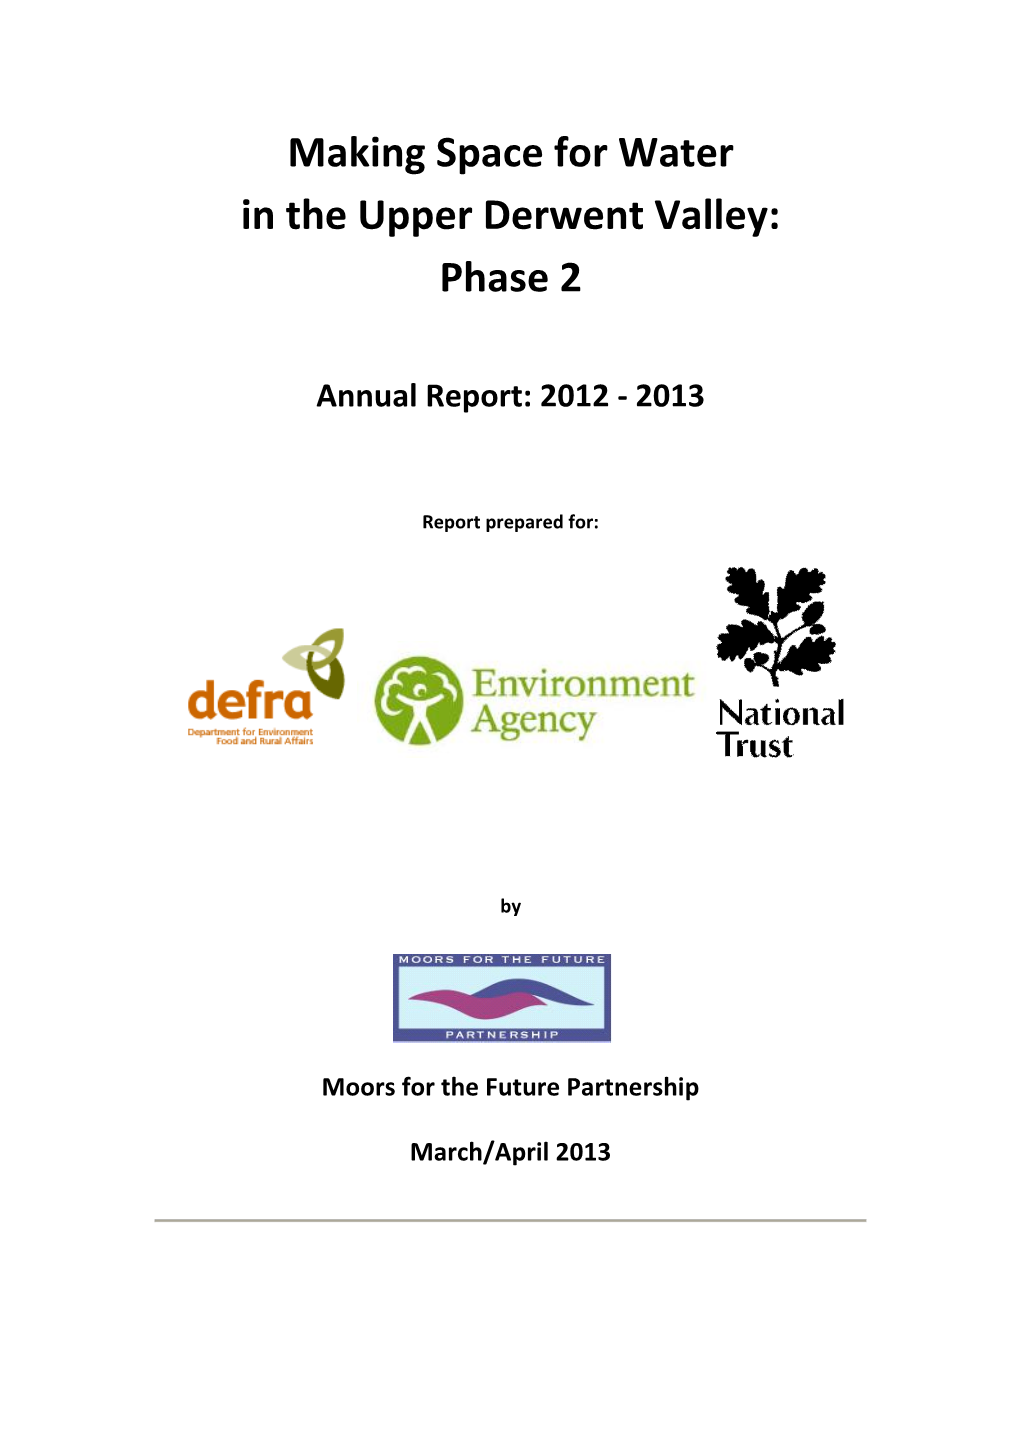 Making Space for Water in the Upper Derwent Valley: Phase 2